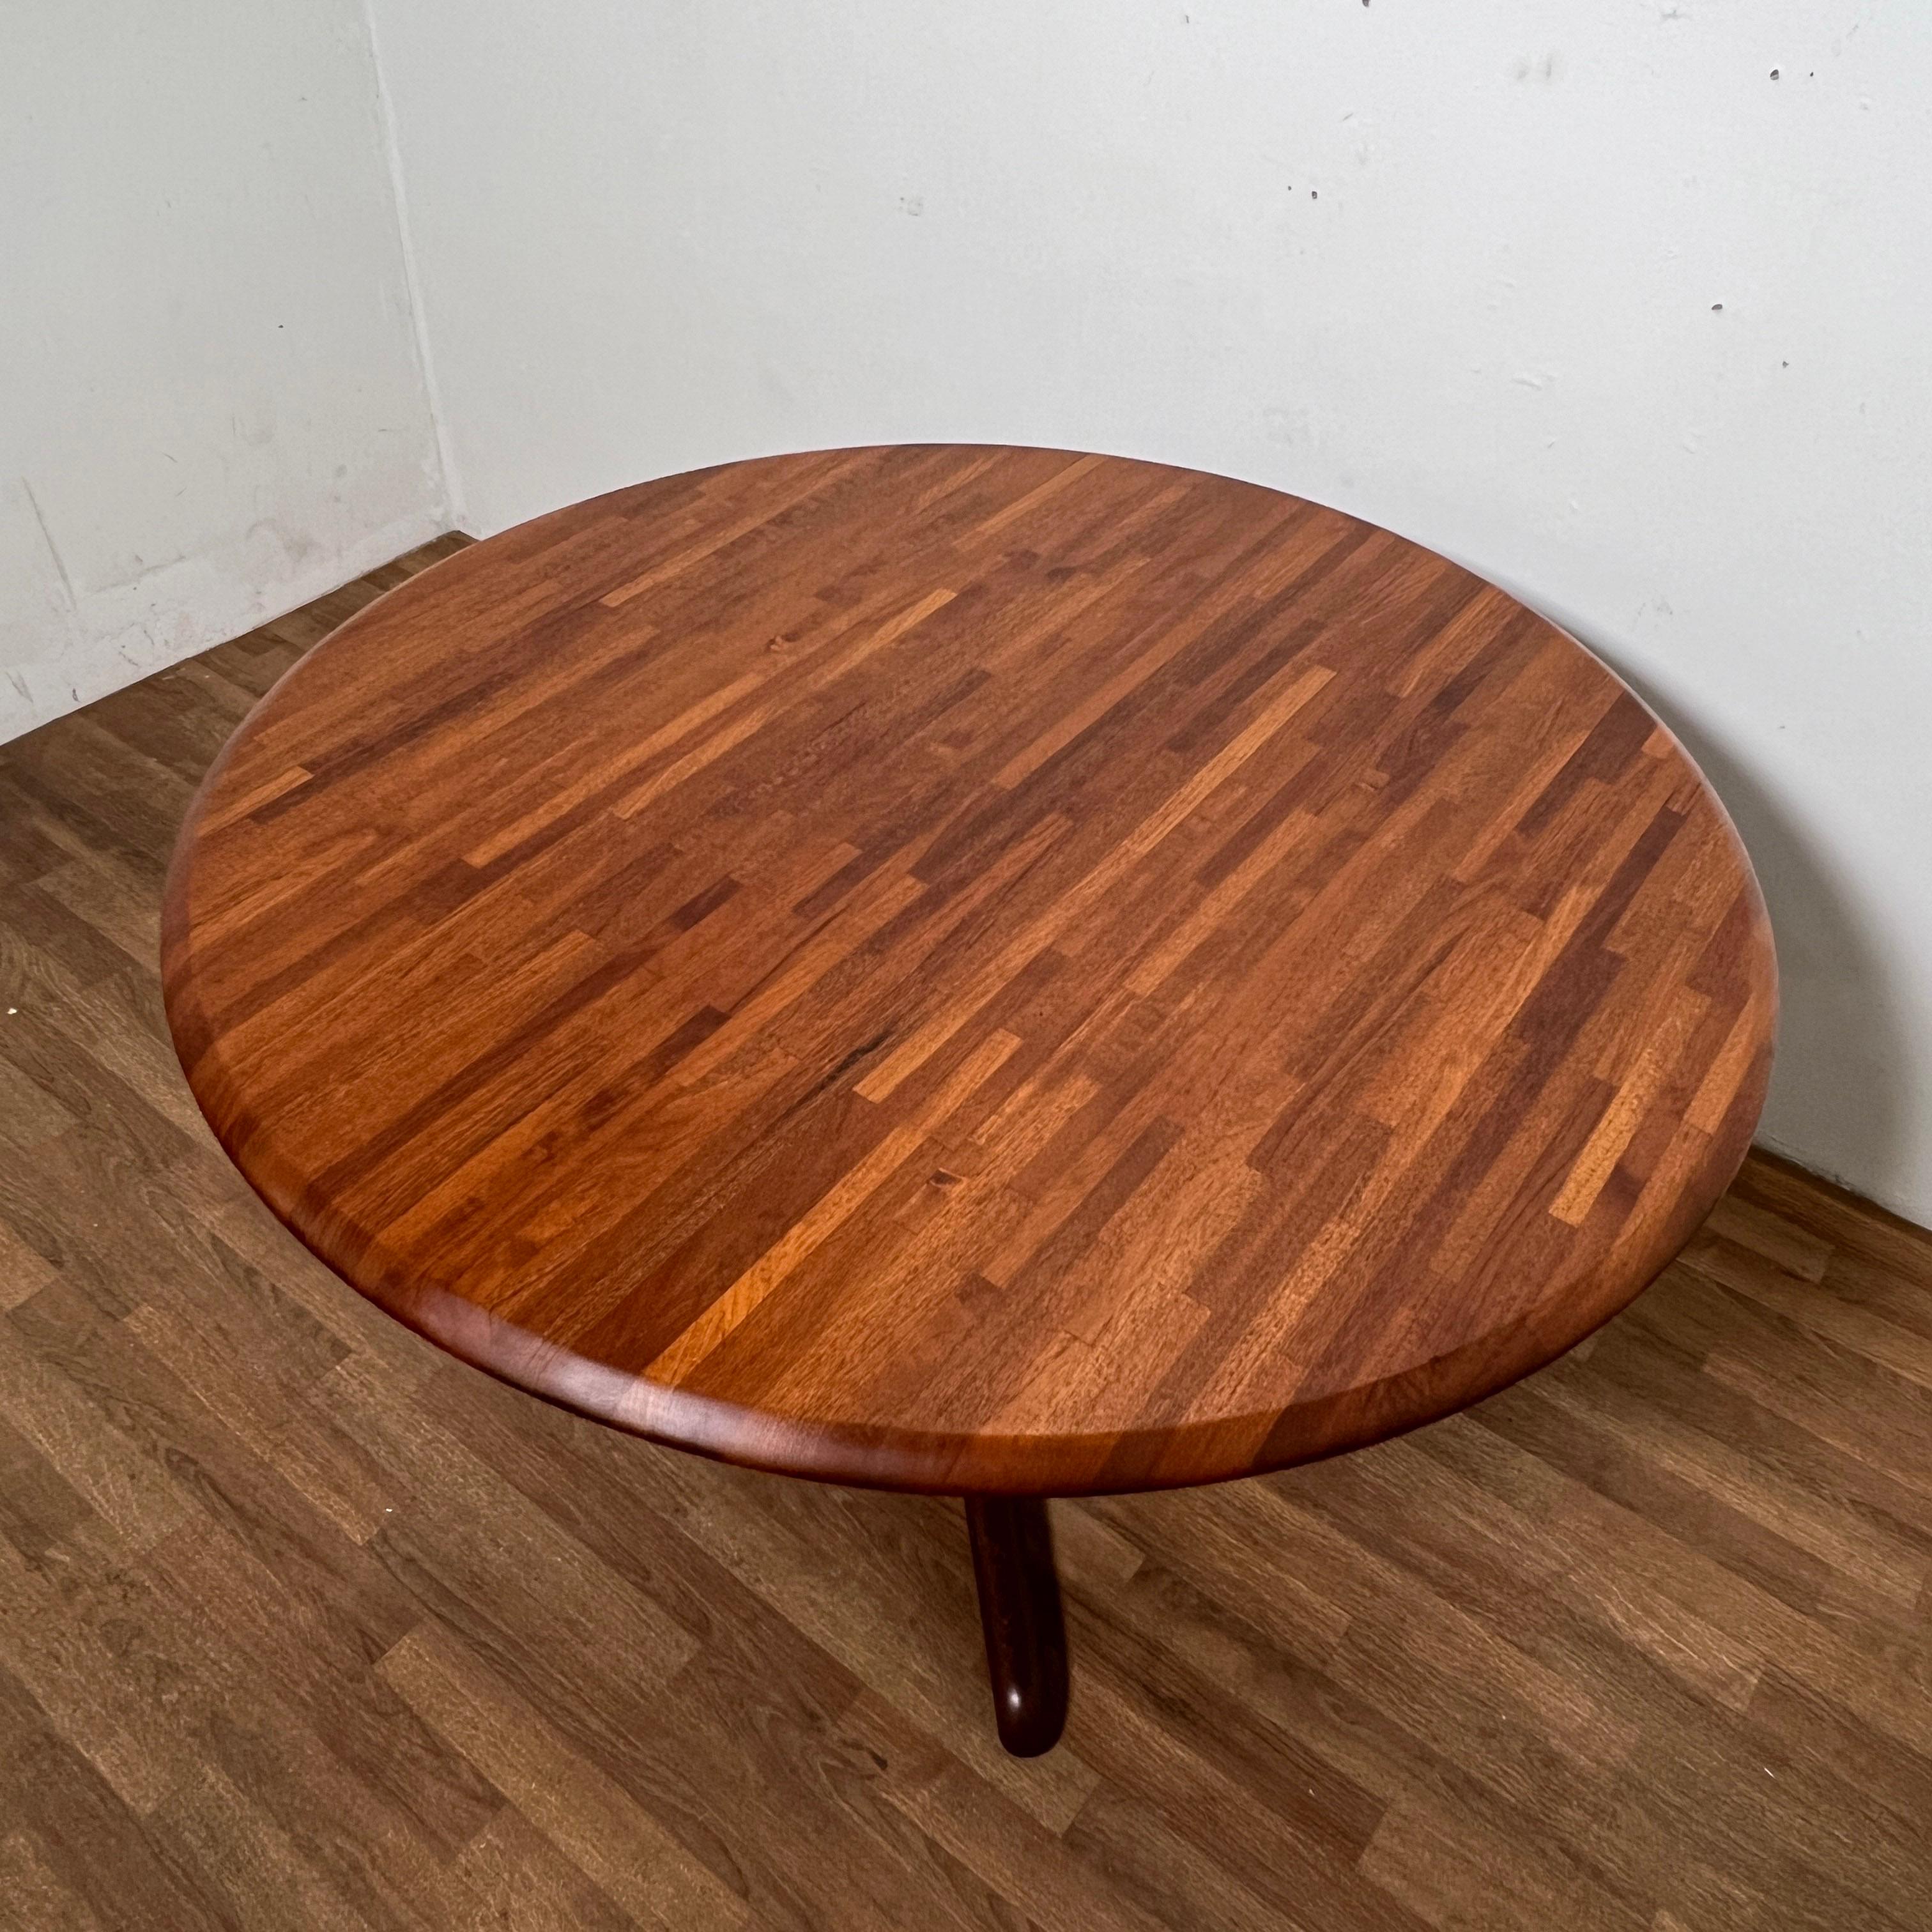 A circular Danish dining table of just under 48